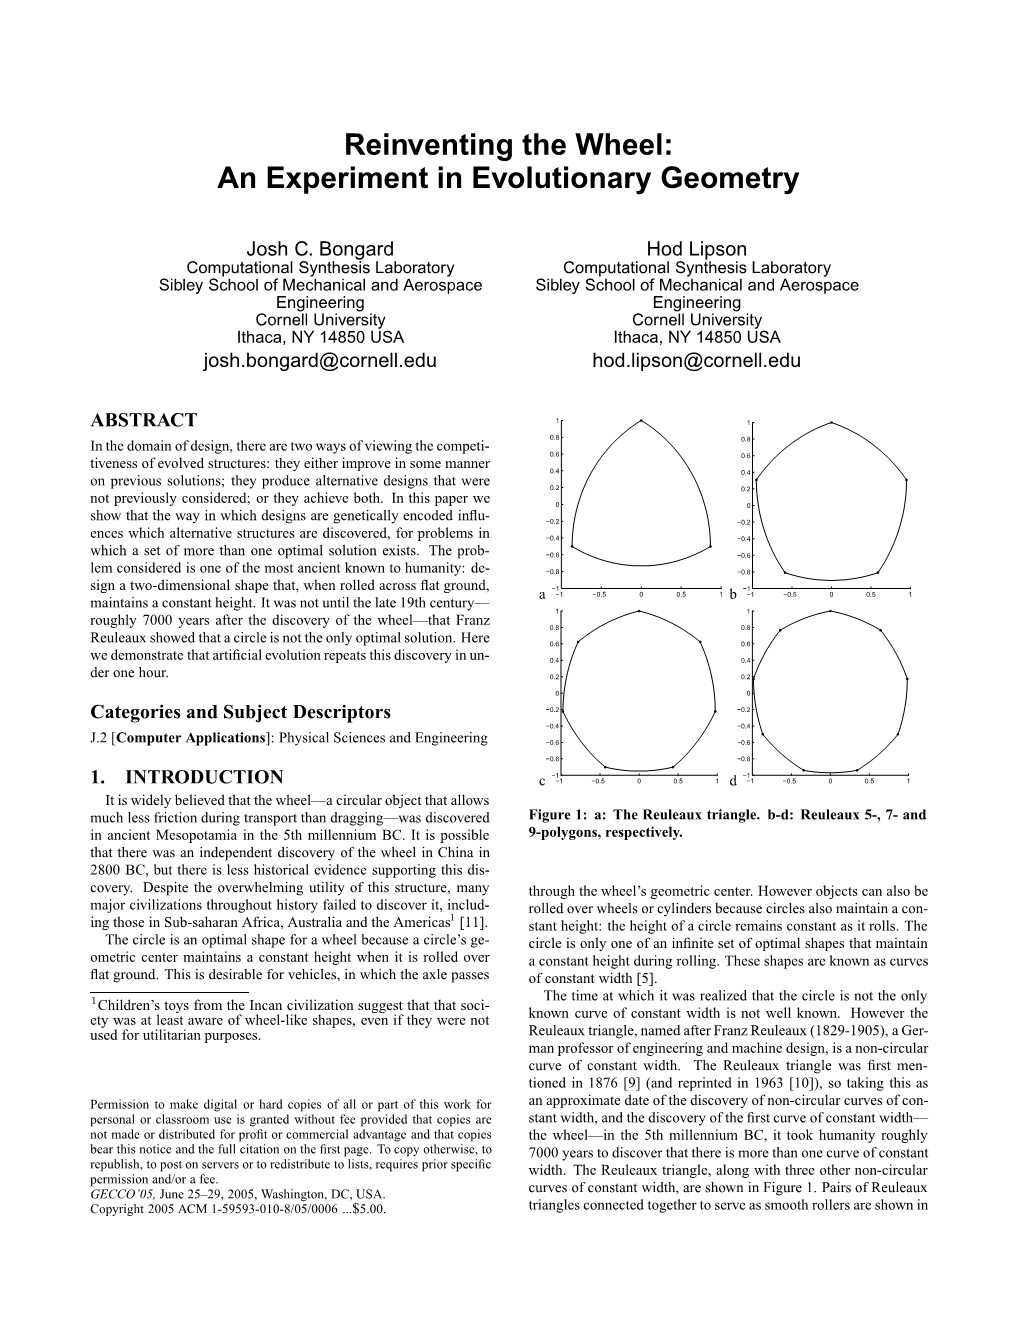 Reinventing the Wheel: an Experiment in Evolutionary Geometry